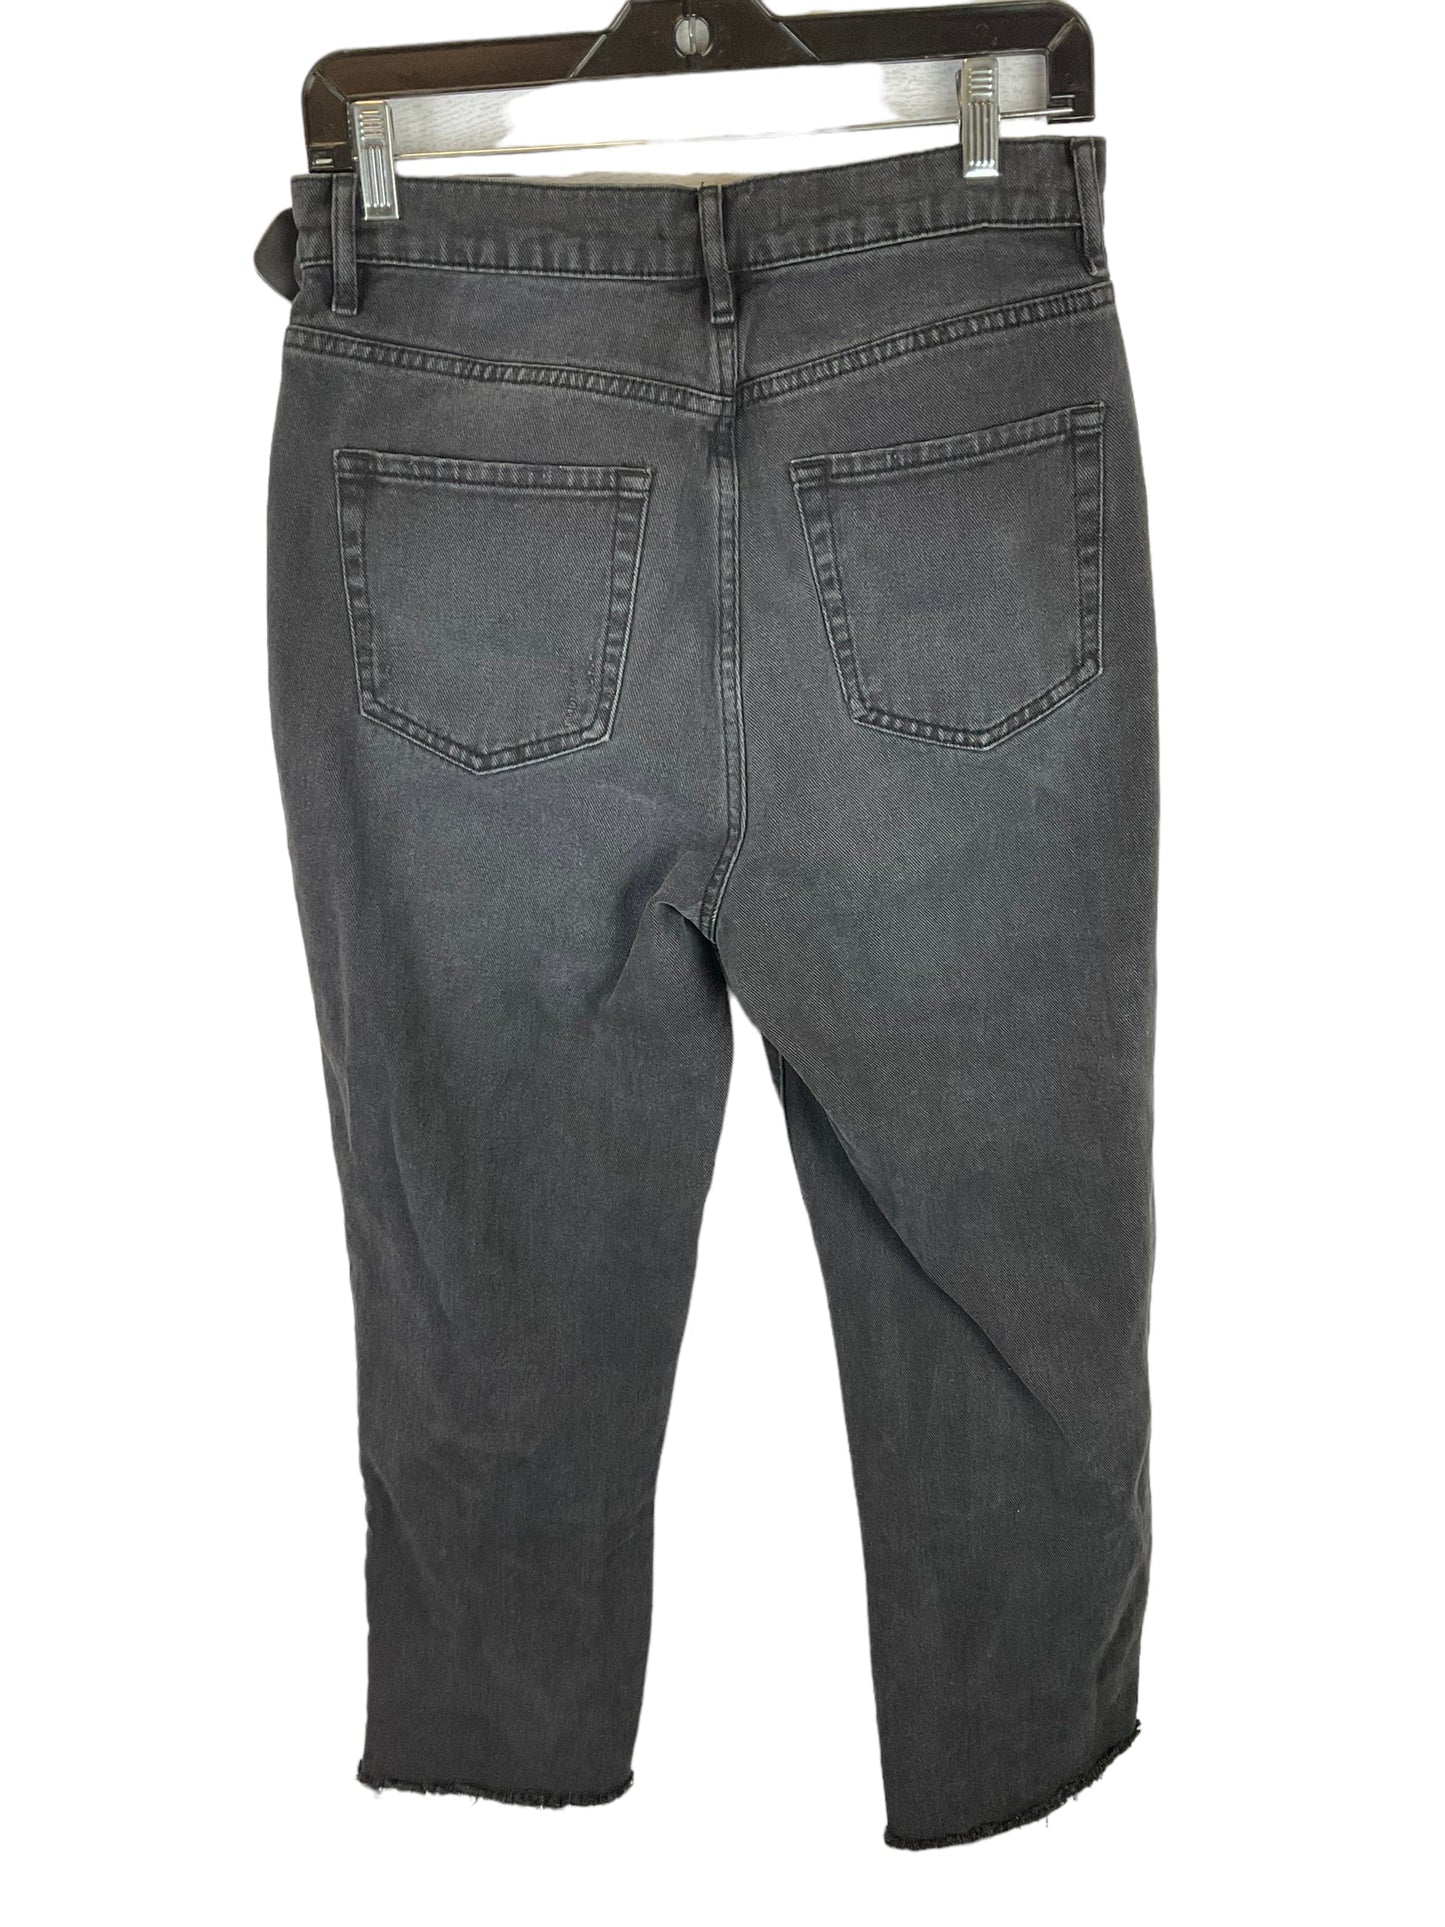 Pants Ankle By Pacsun  Size: 6